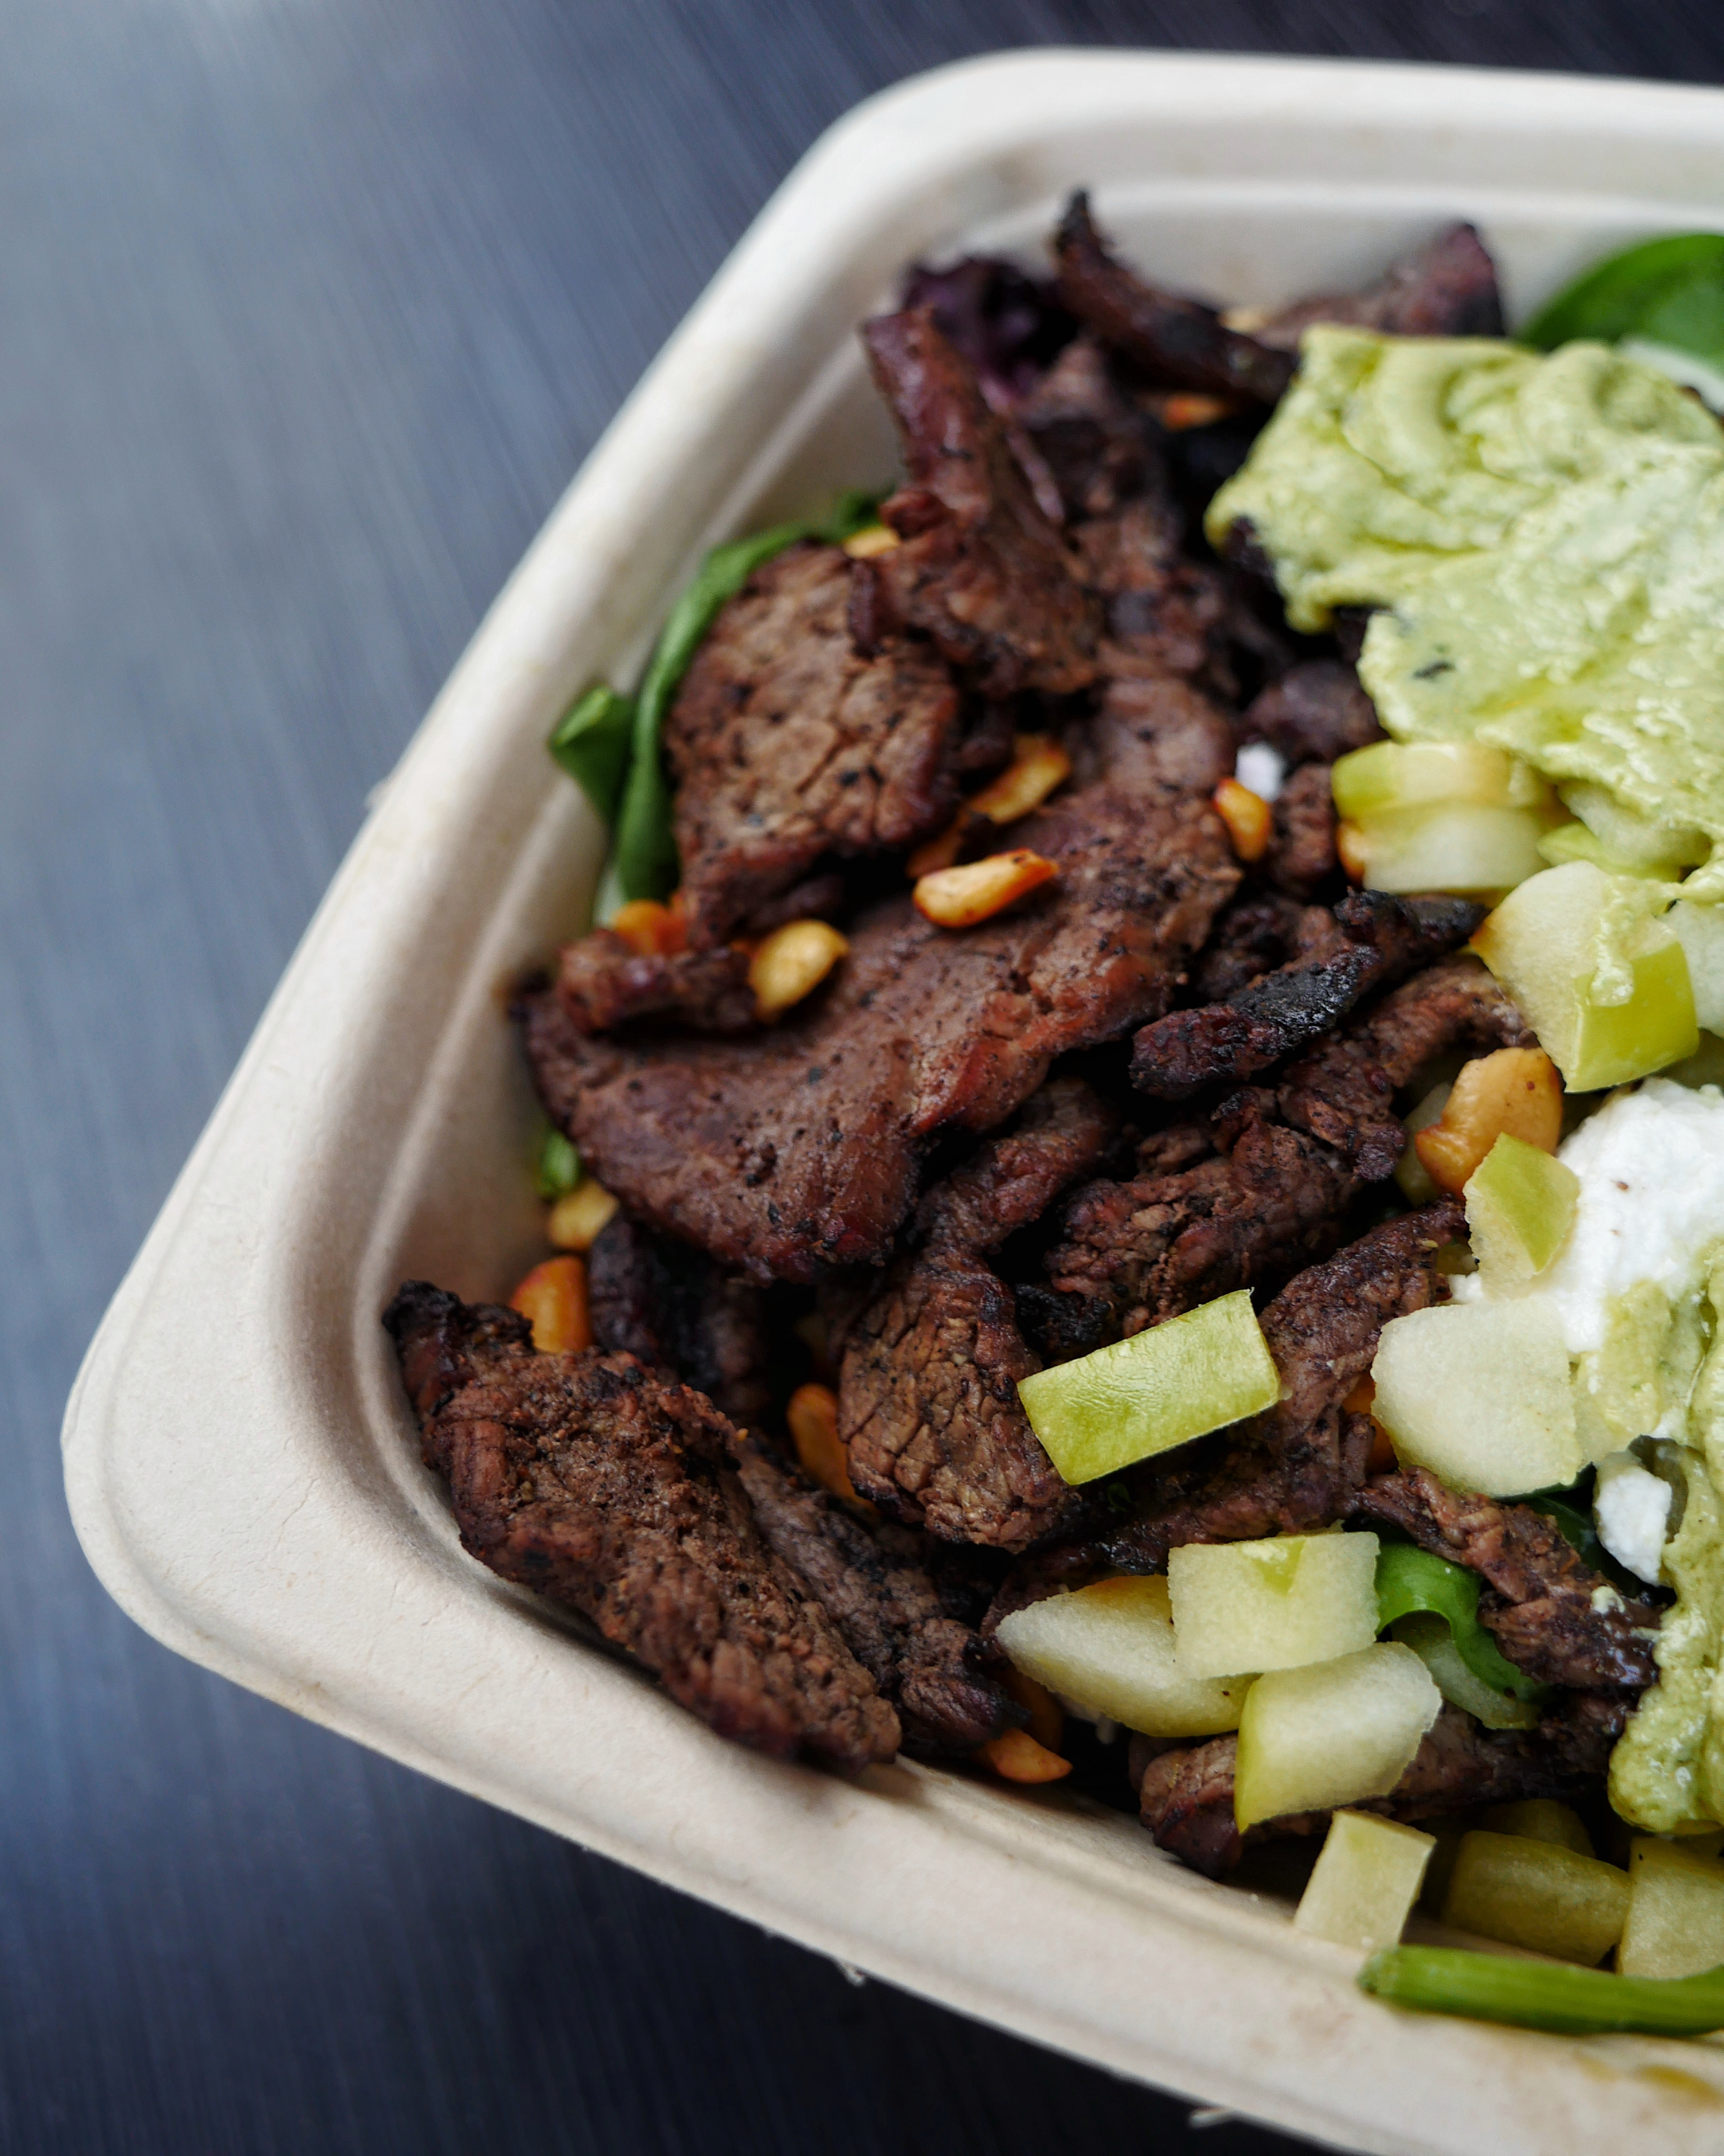 Underworld: Grilled Steak with granny smith apples, pickles, toasted cashew nuts, goat cheese and white sesame sauce